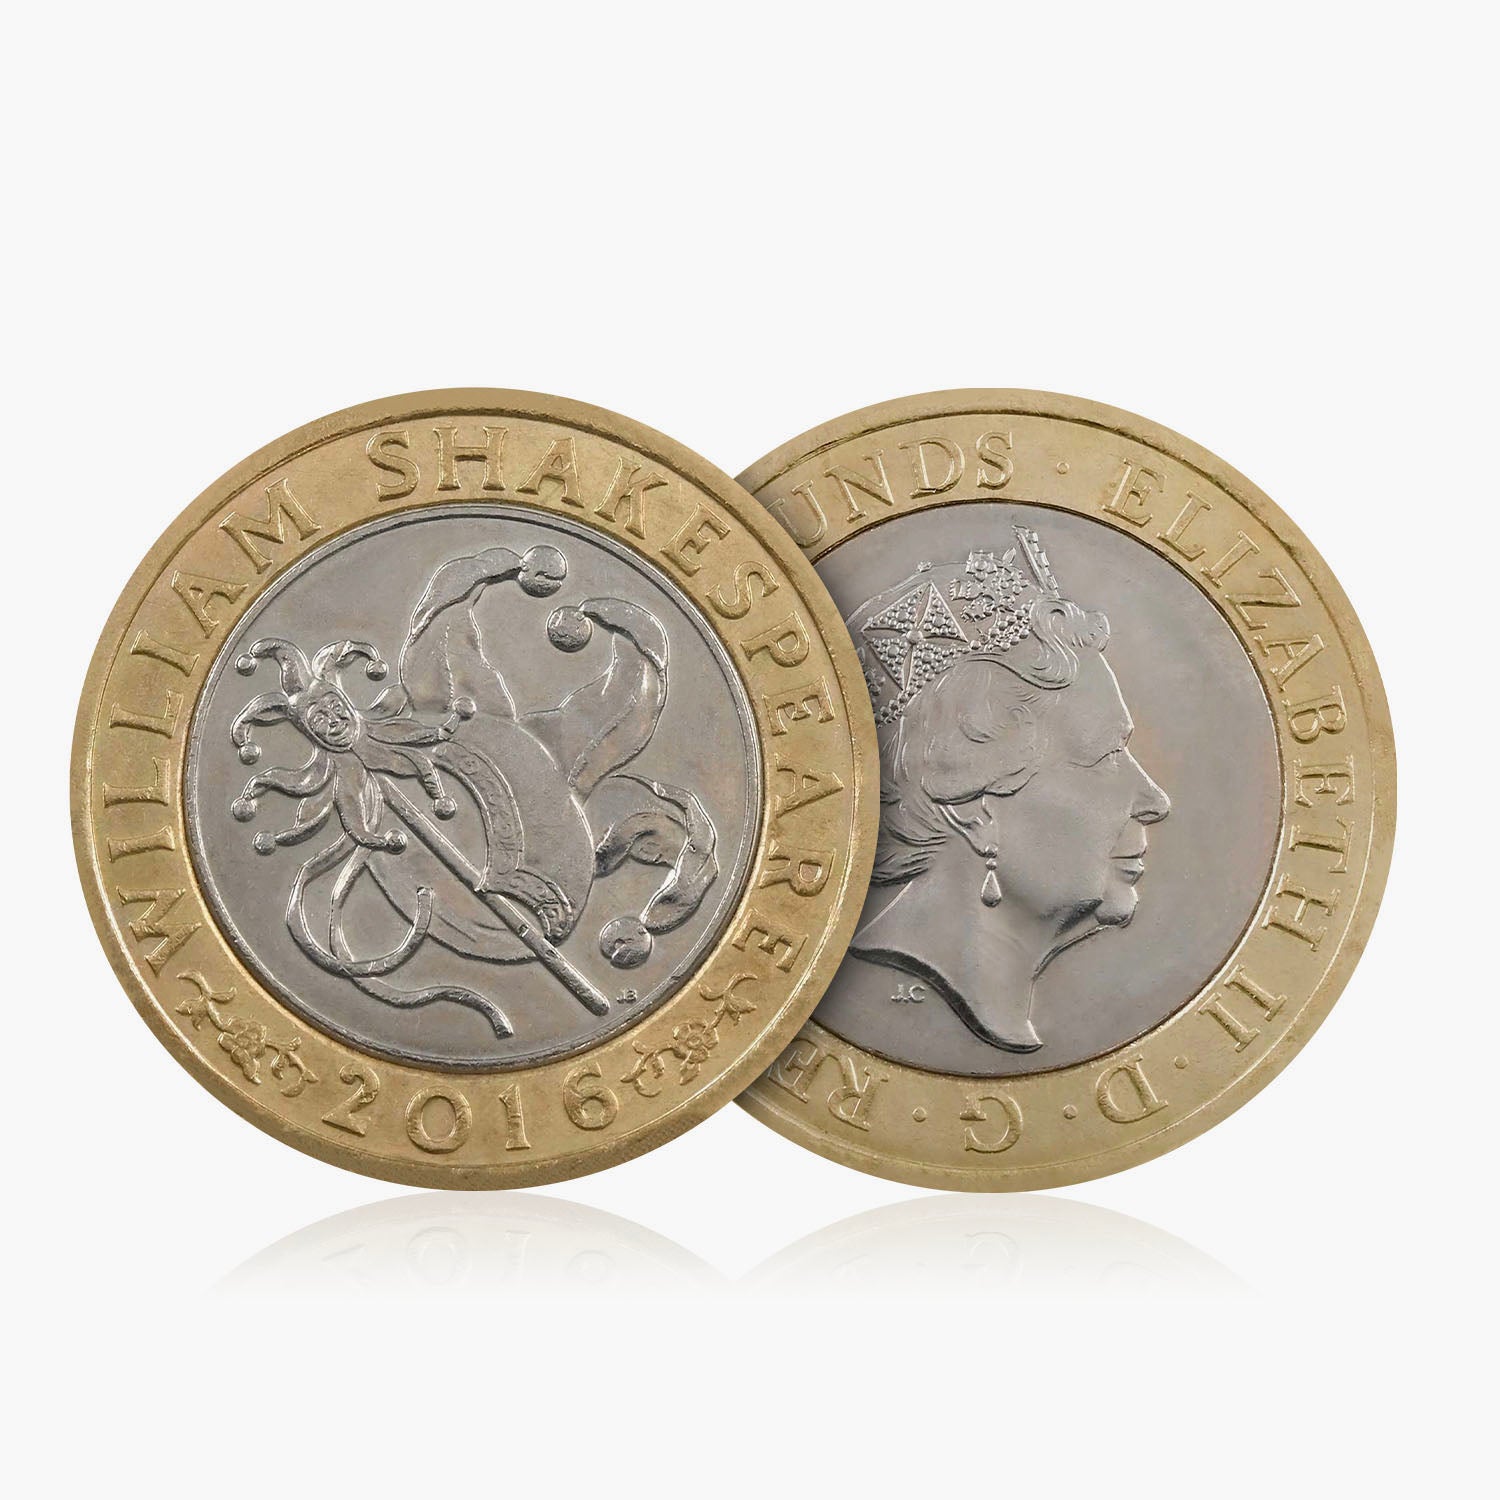 2016 Circulated Shakespeare Comedies UK £2 Coin